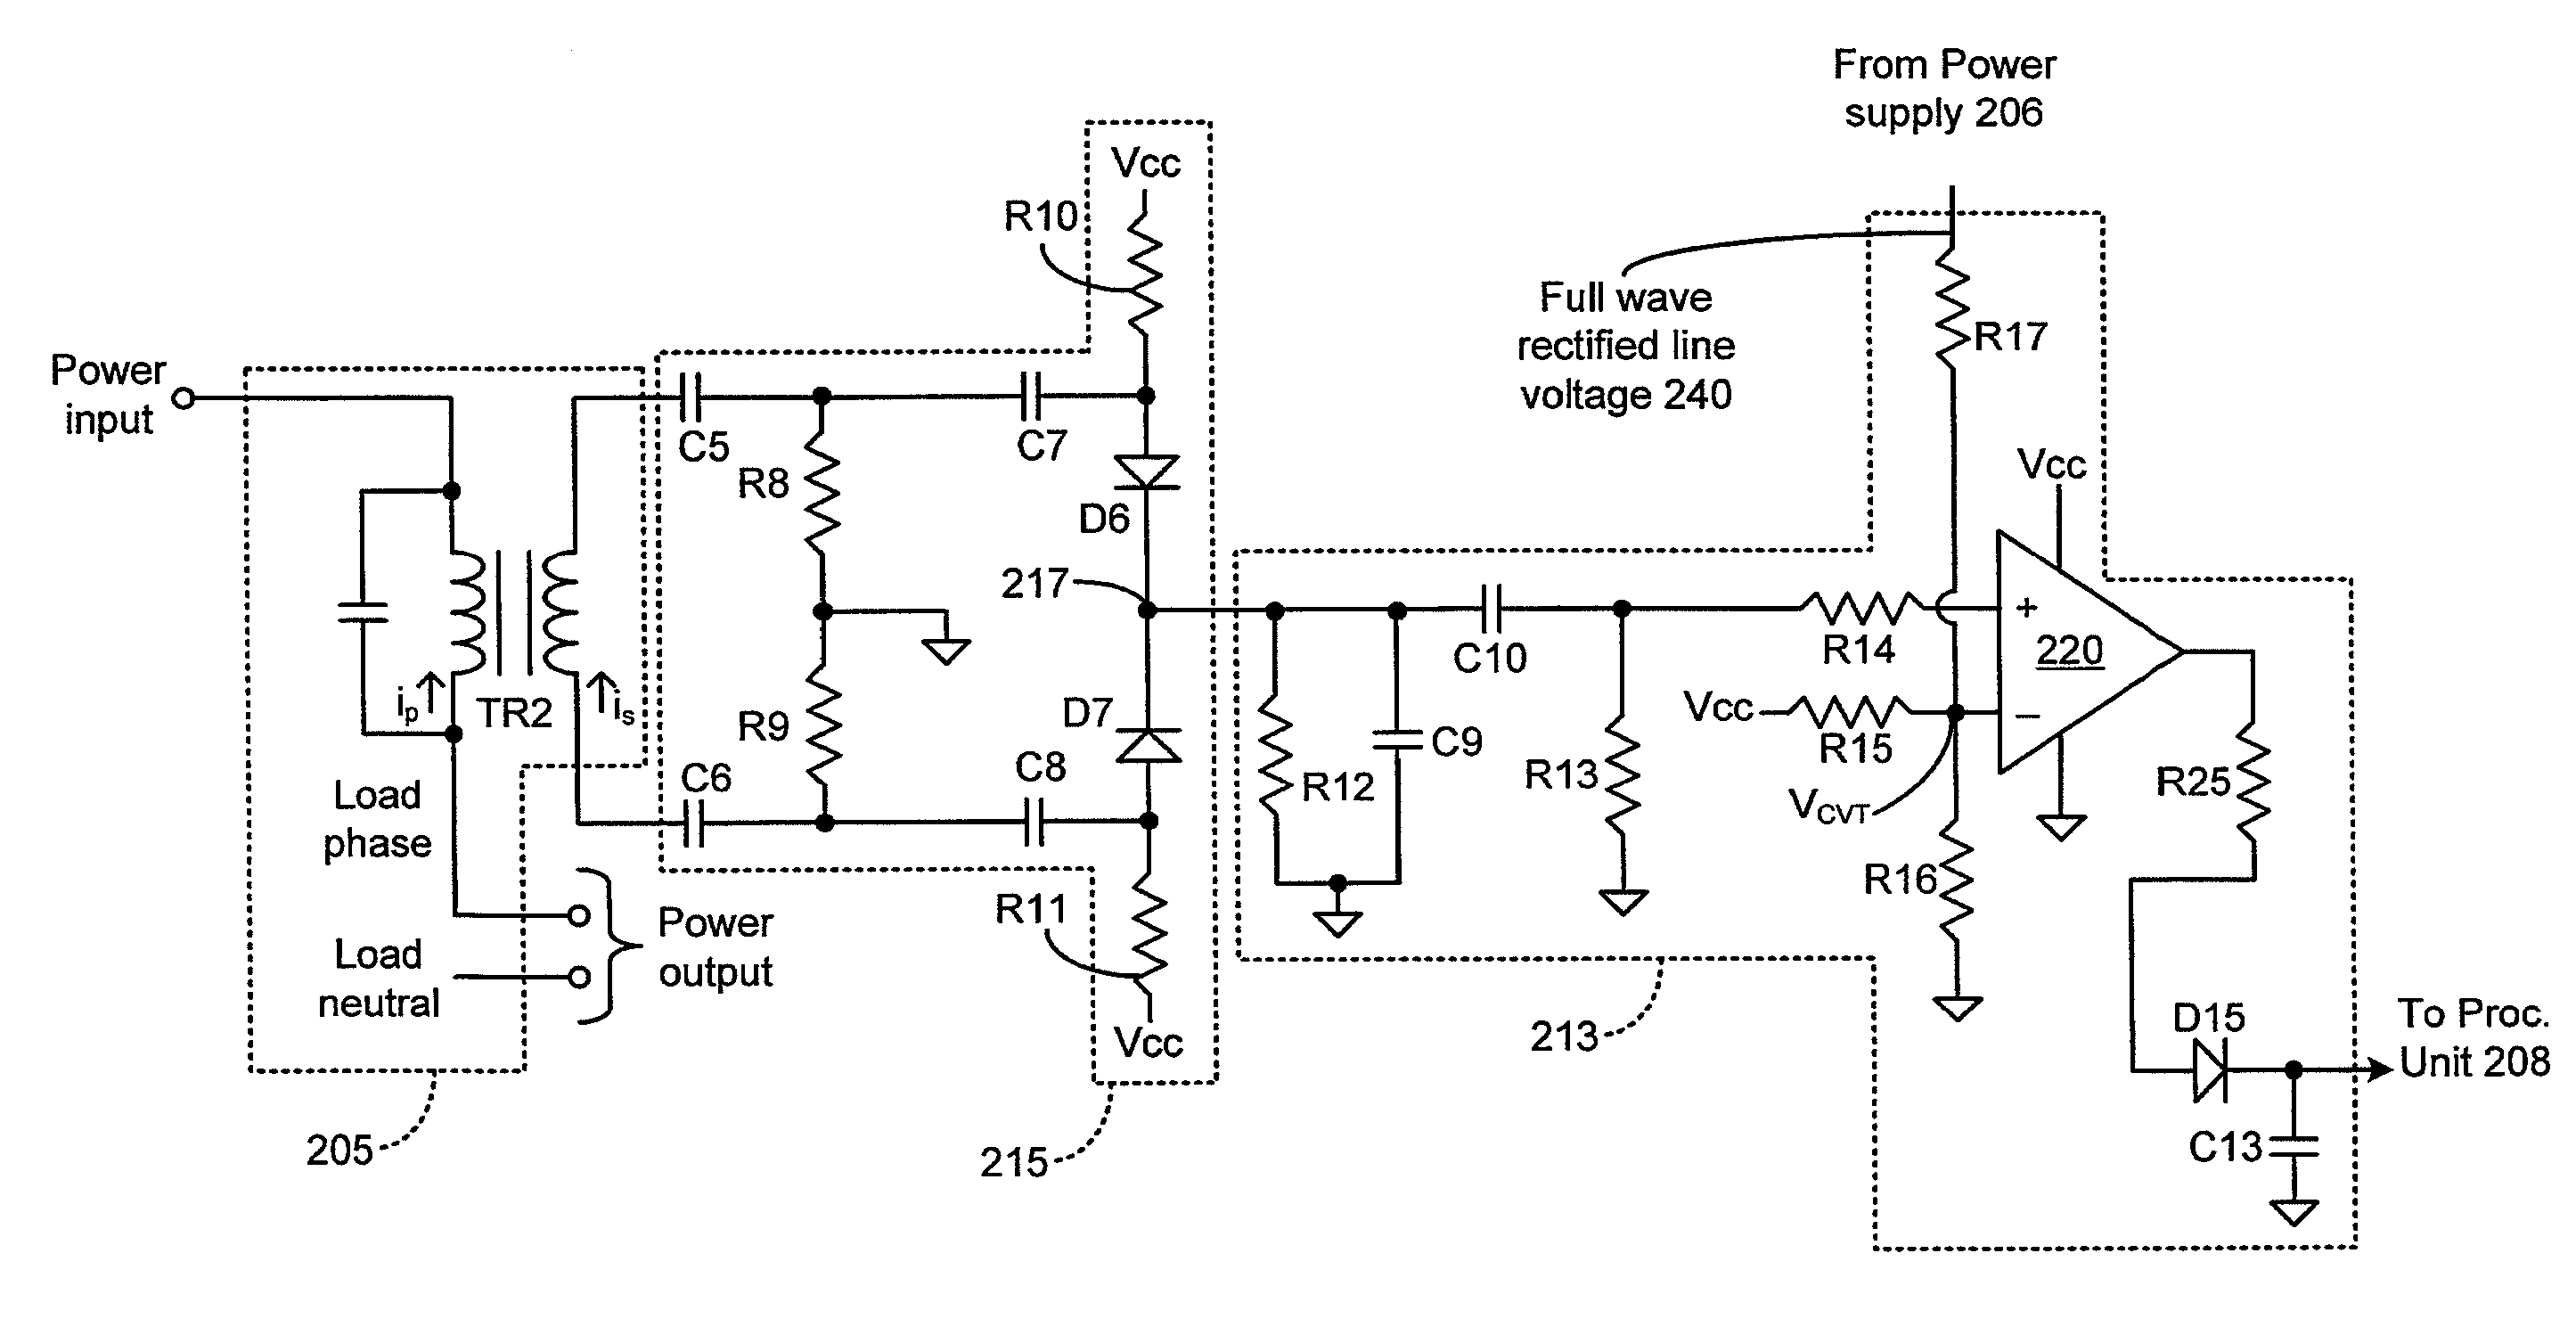 Arc fault detection apparatus employing a comparator with a continuously variable threshold